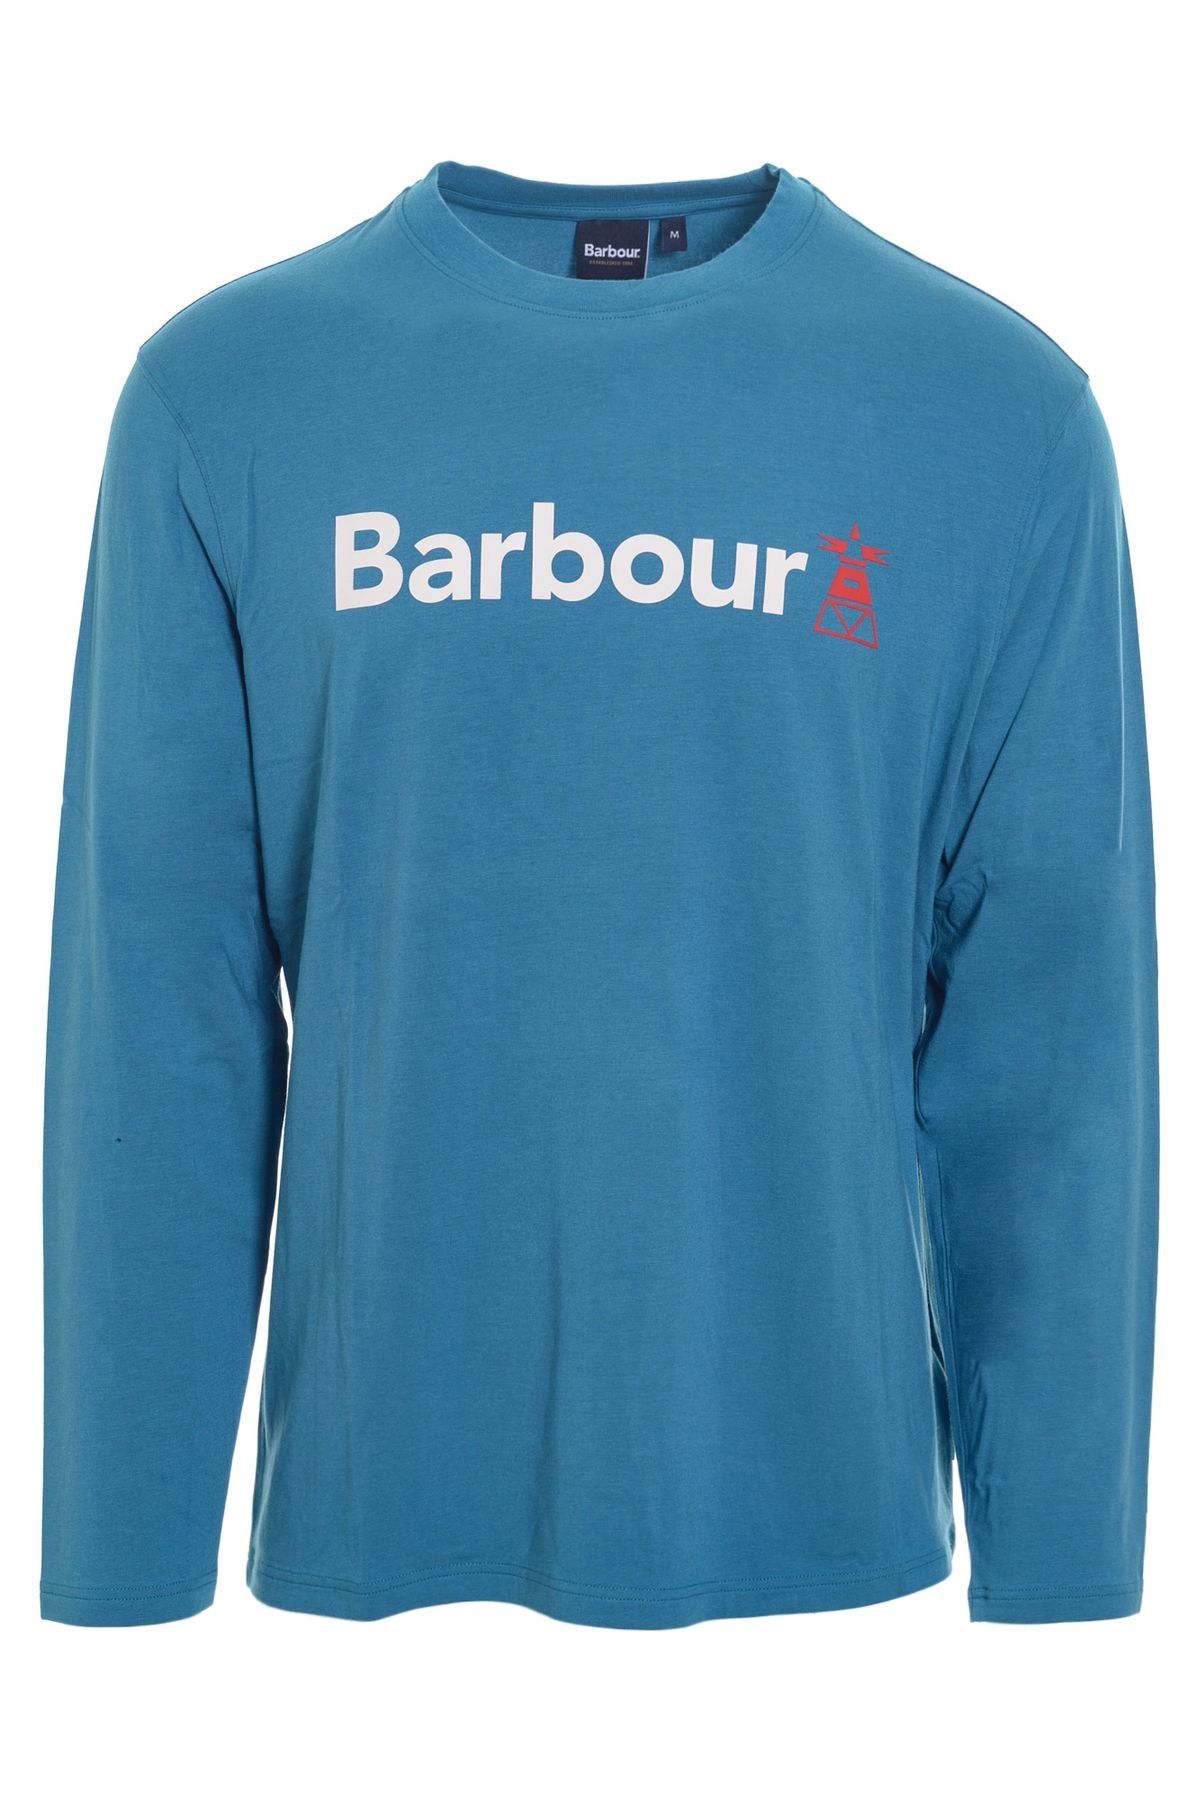 BARBOUR T-shirt Autunno/Inverno mts1056bl74